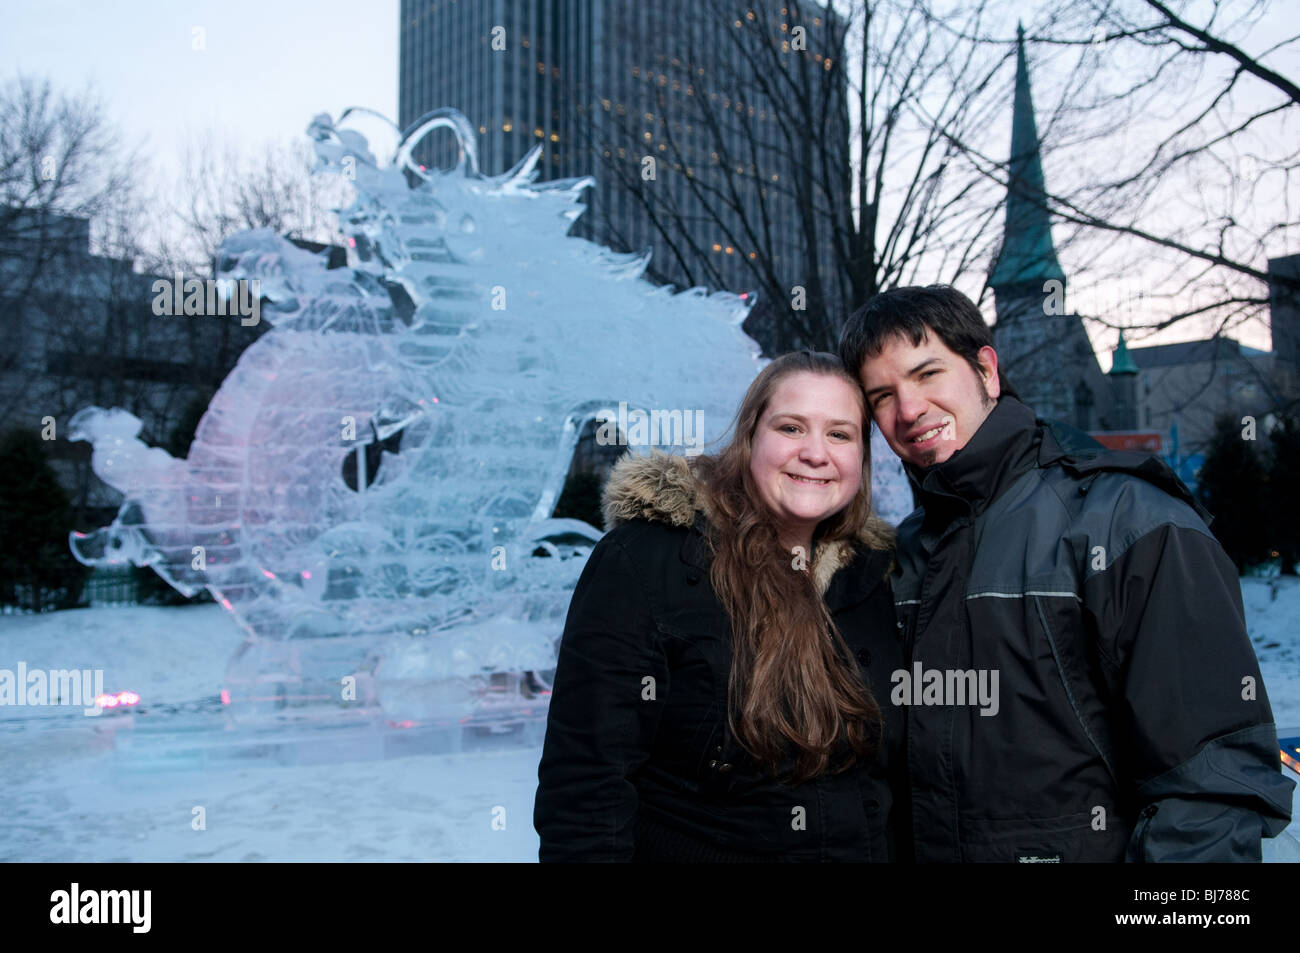 A young smiling couple pose in front of an ice sculpture during annual Winterlude festivities in Ottawa, Canada. Stock Photo